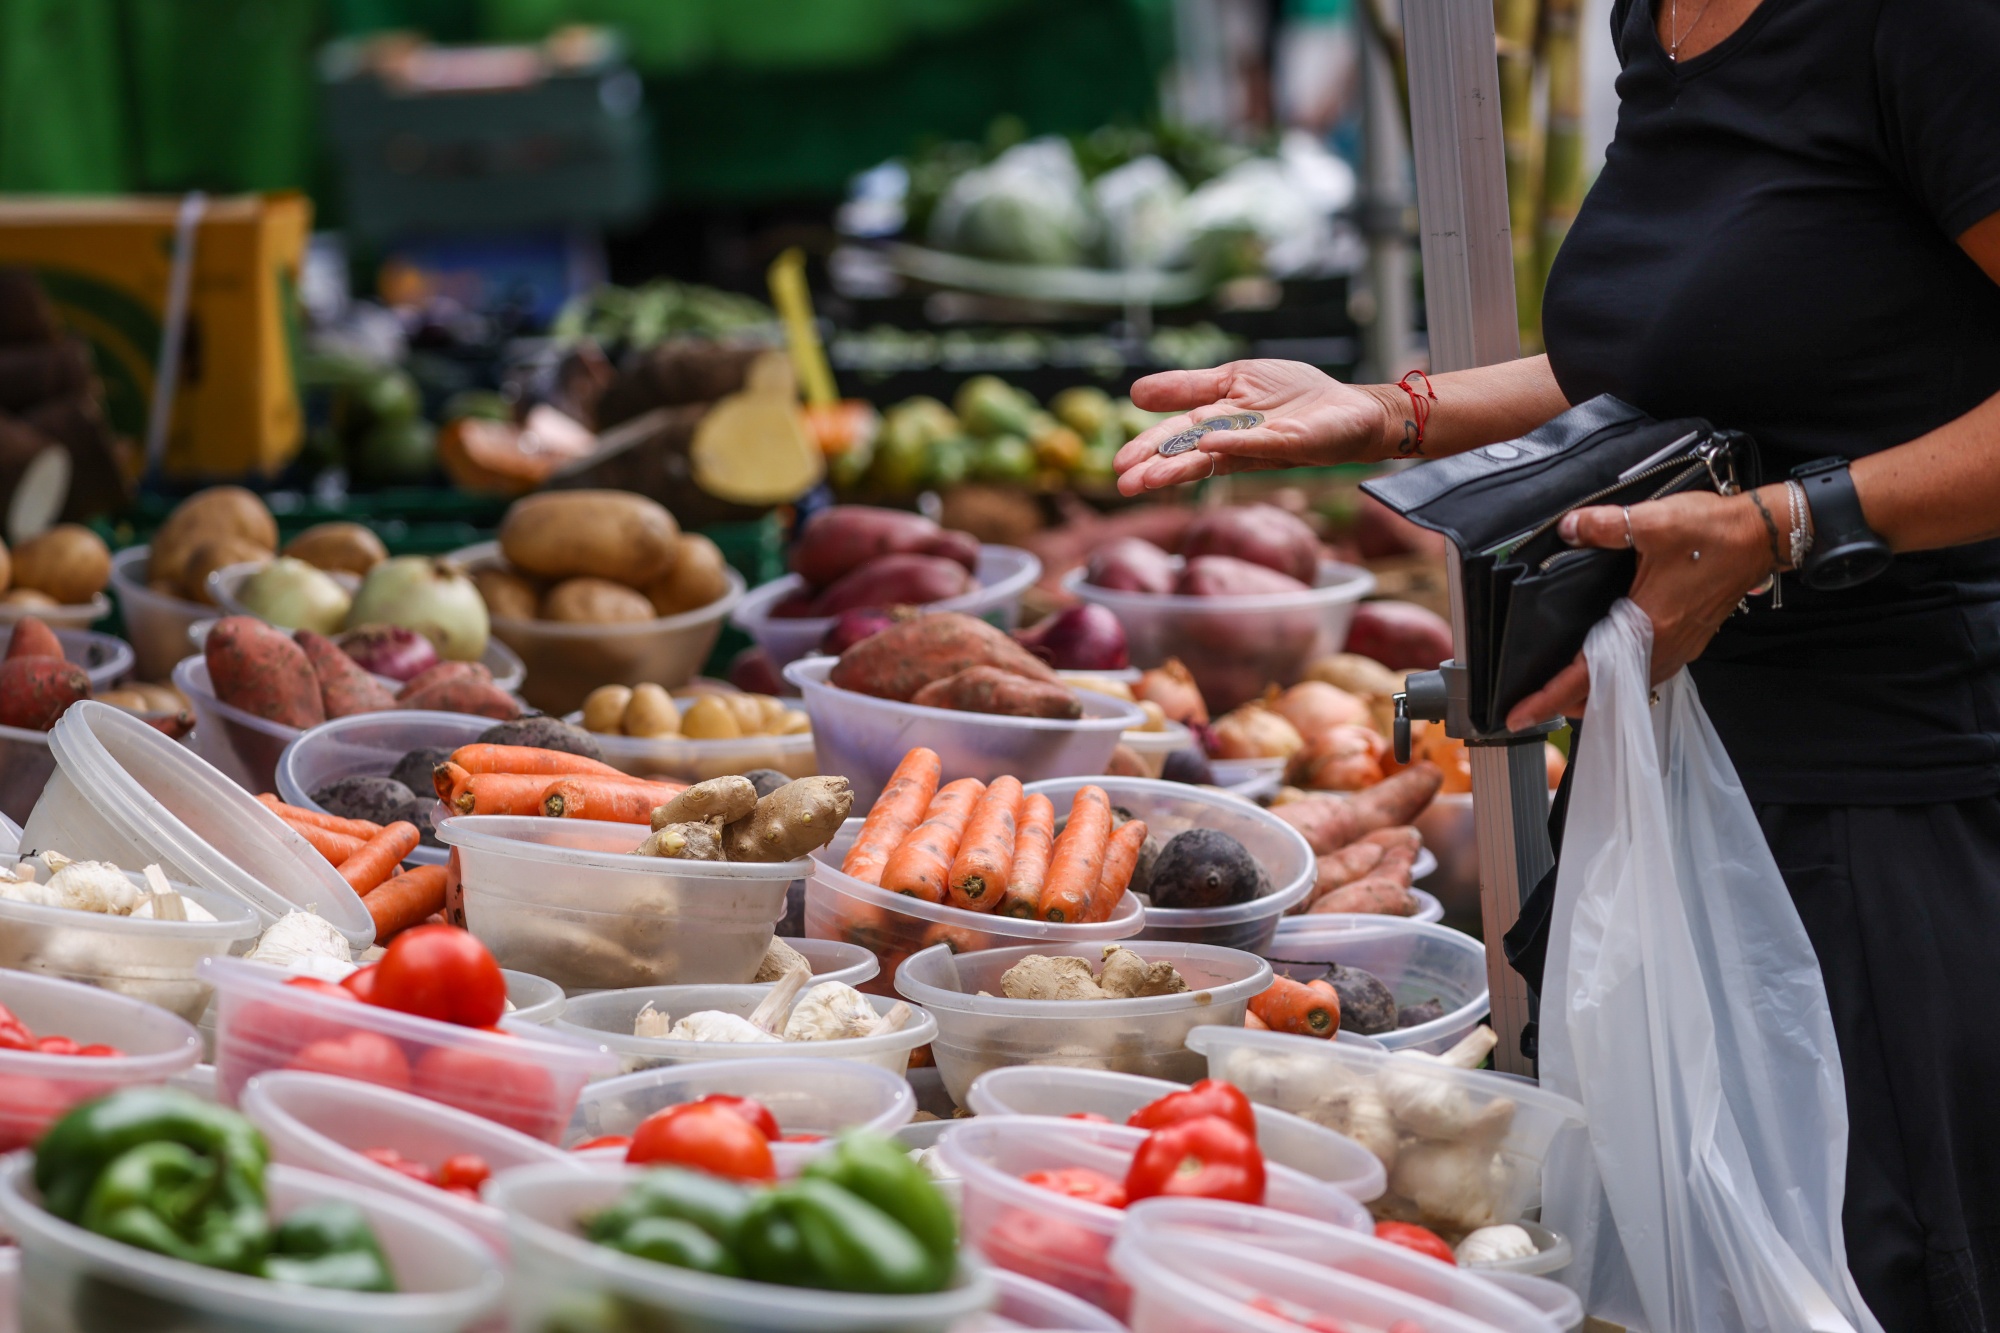 A customer pays for fresh produce at a grocery stall in Croydon, earlier in July.